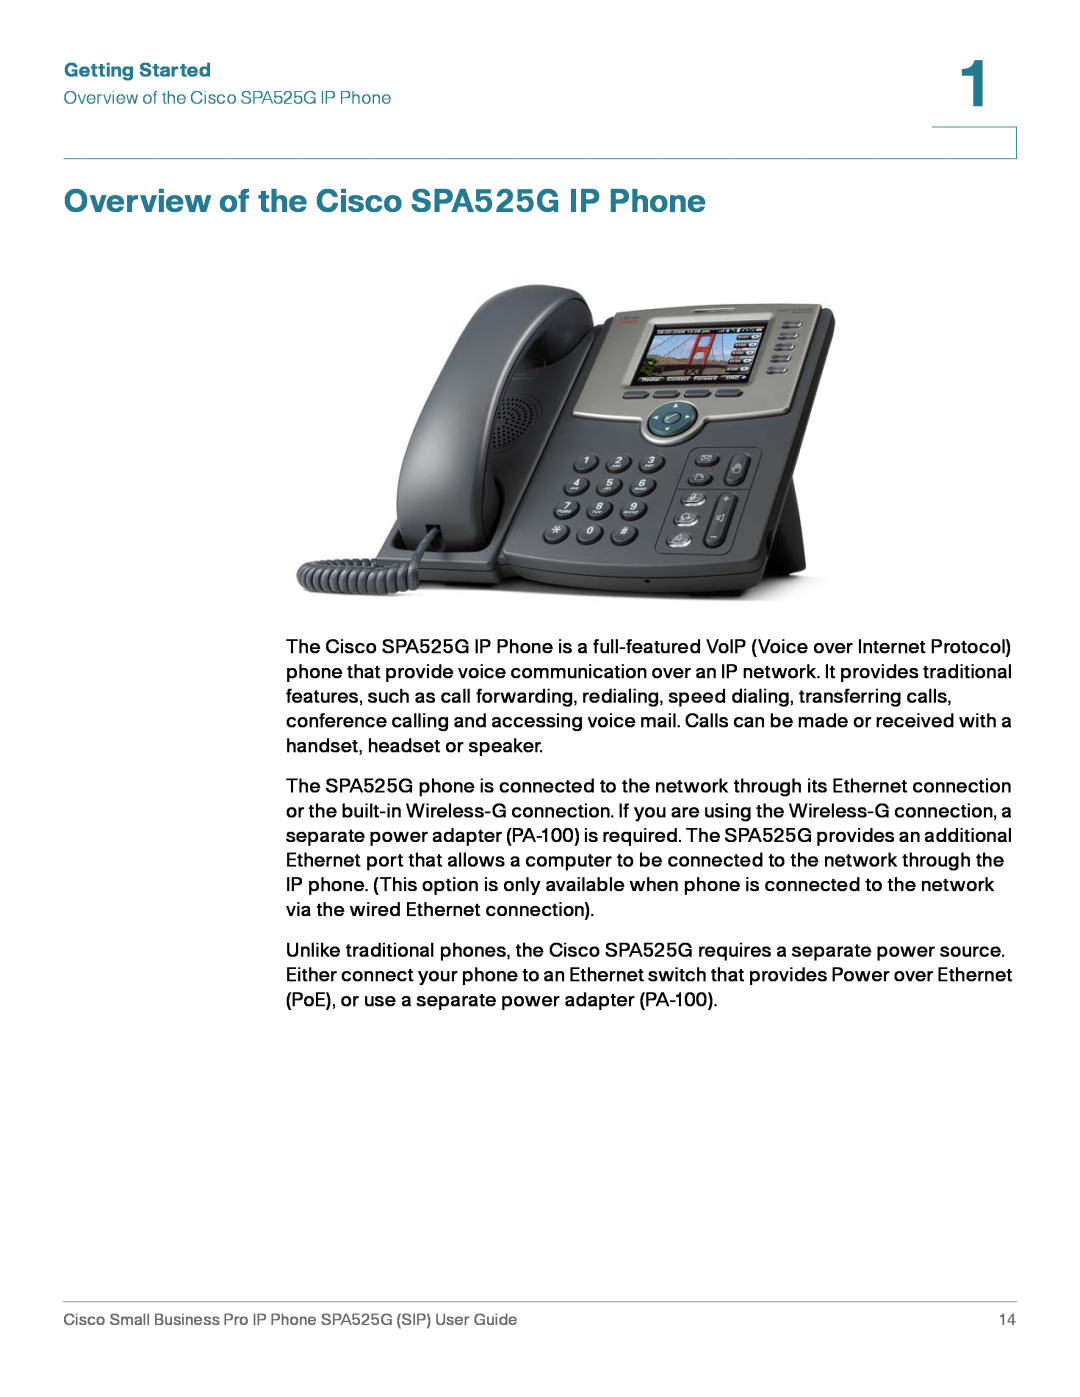 Cisco Systems manual Overview of the Cisco SPA525G IP Phone, Getting Started 